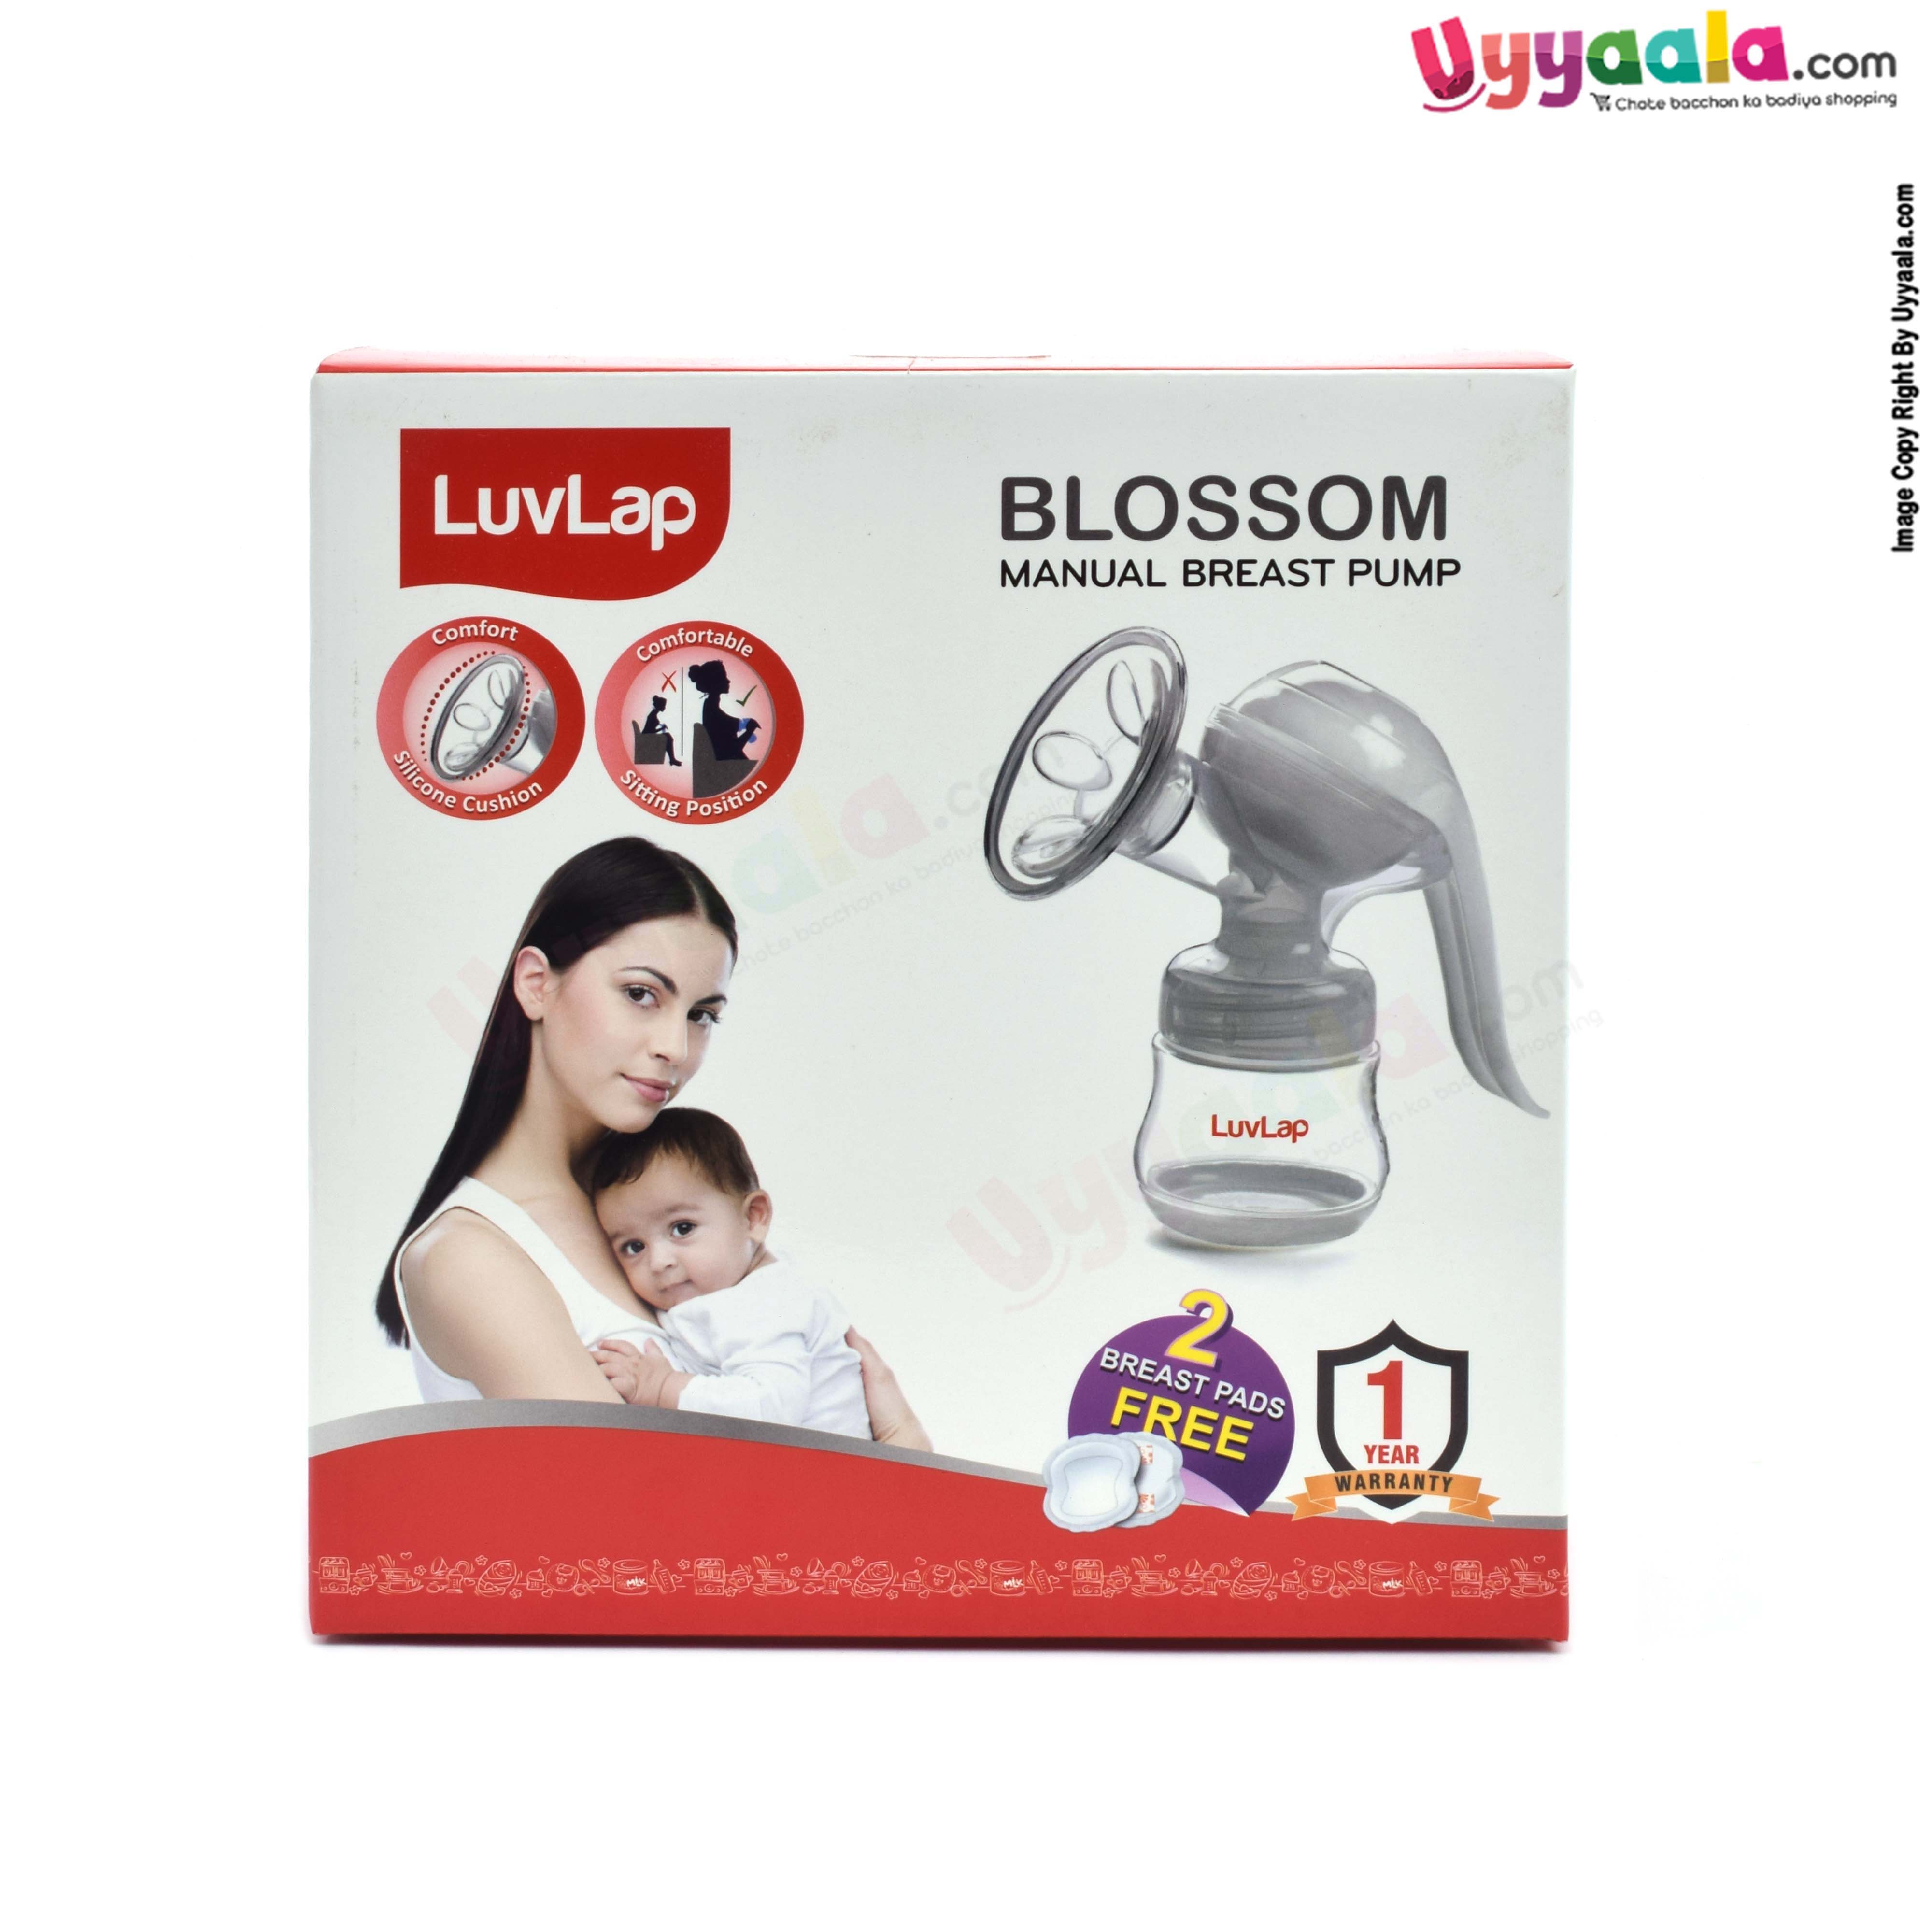 LUVLAP Blossom Manual Breast Pump with 2 Breast Pads Free